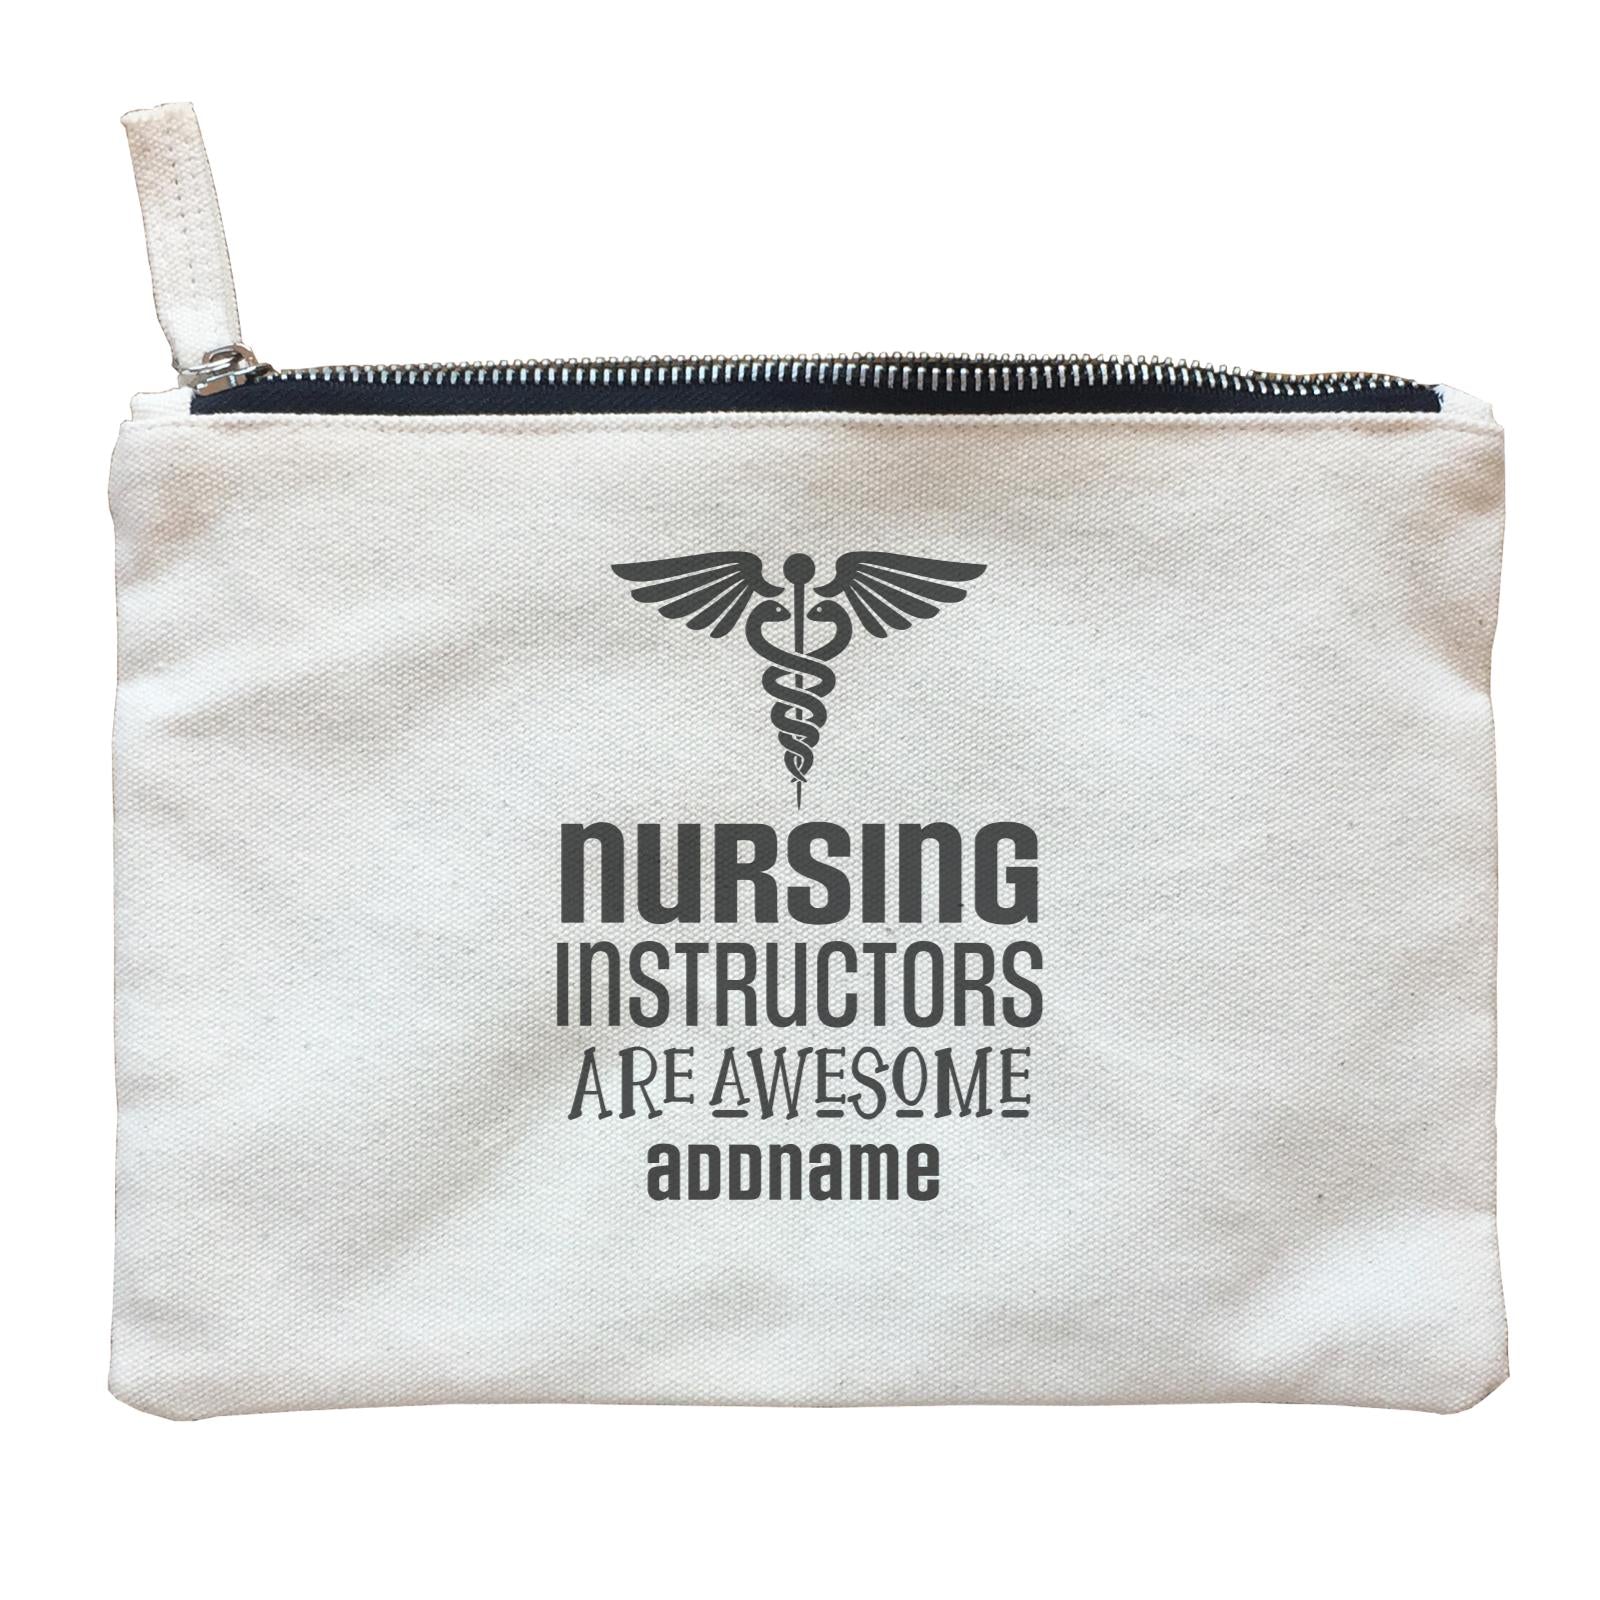 Nurse Quotes Nursing Instructors Are Awesome Addname Zipper Pouch